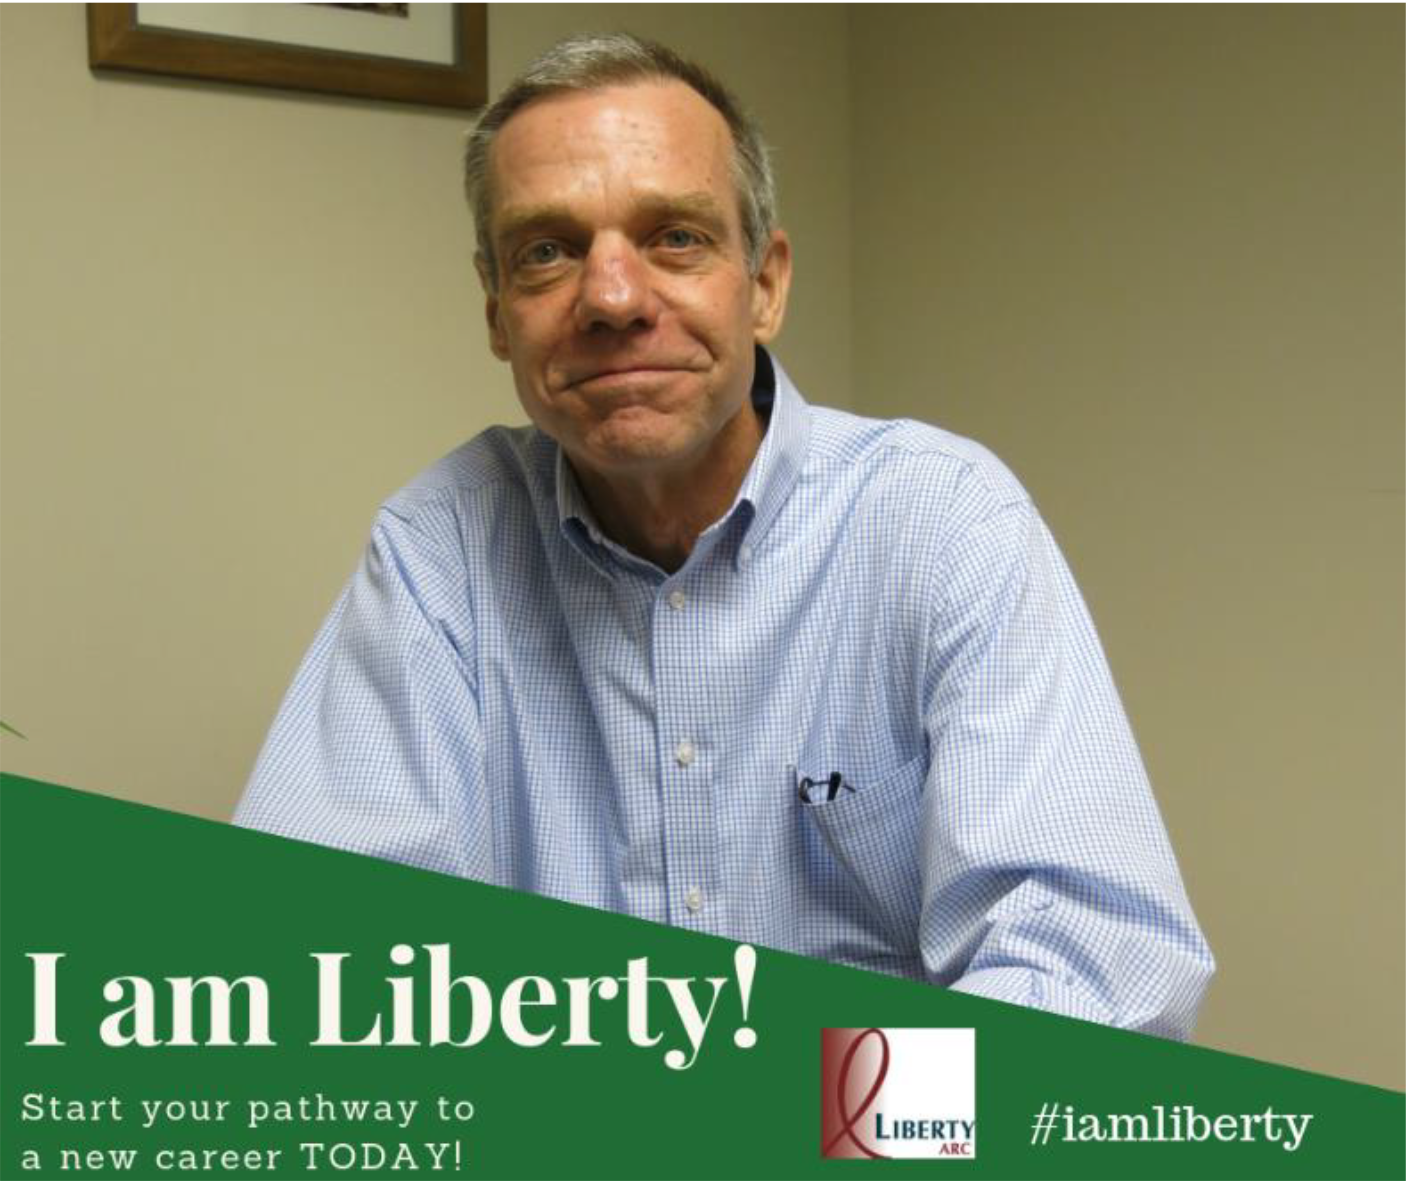 I am Liberty Story: Start Your Pathway to a New Career Today. Headshot of Andy Stegeland.